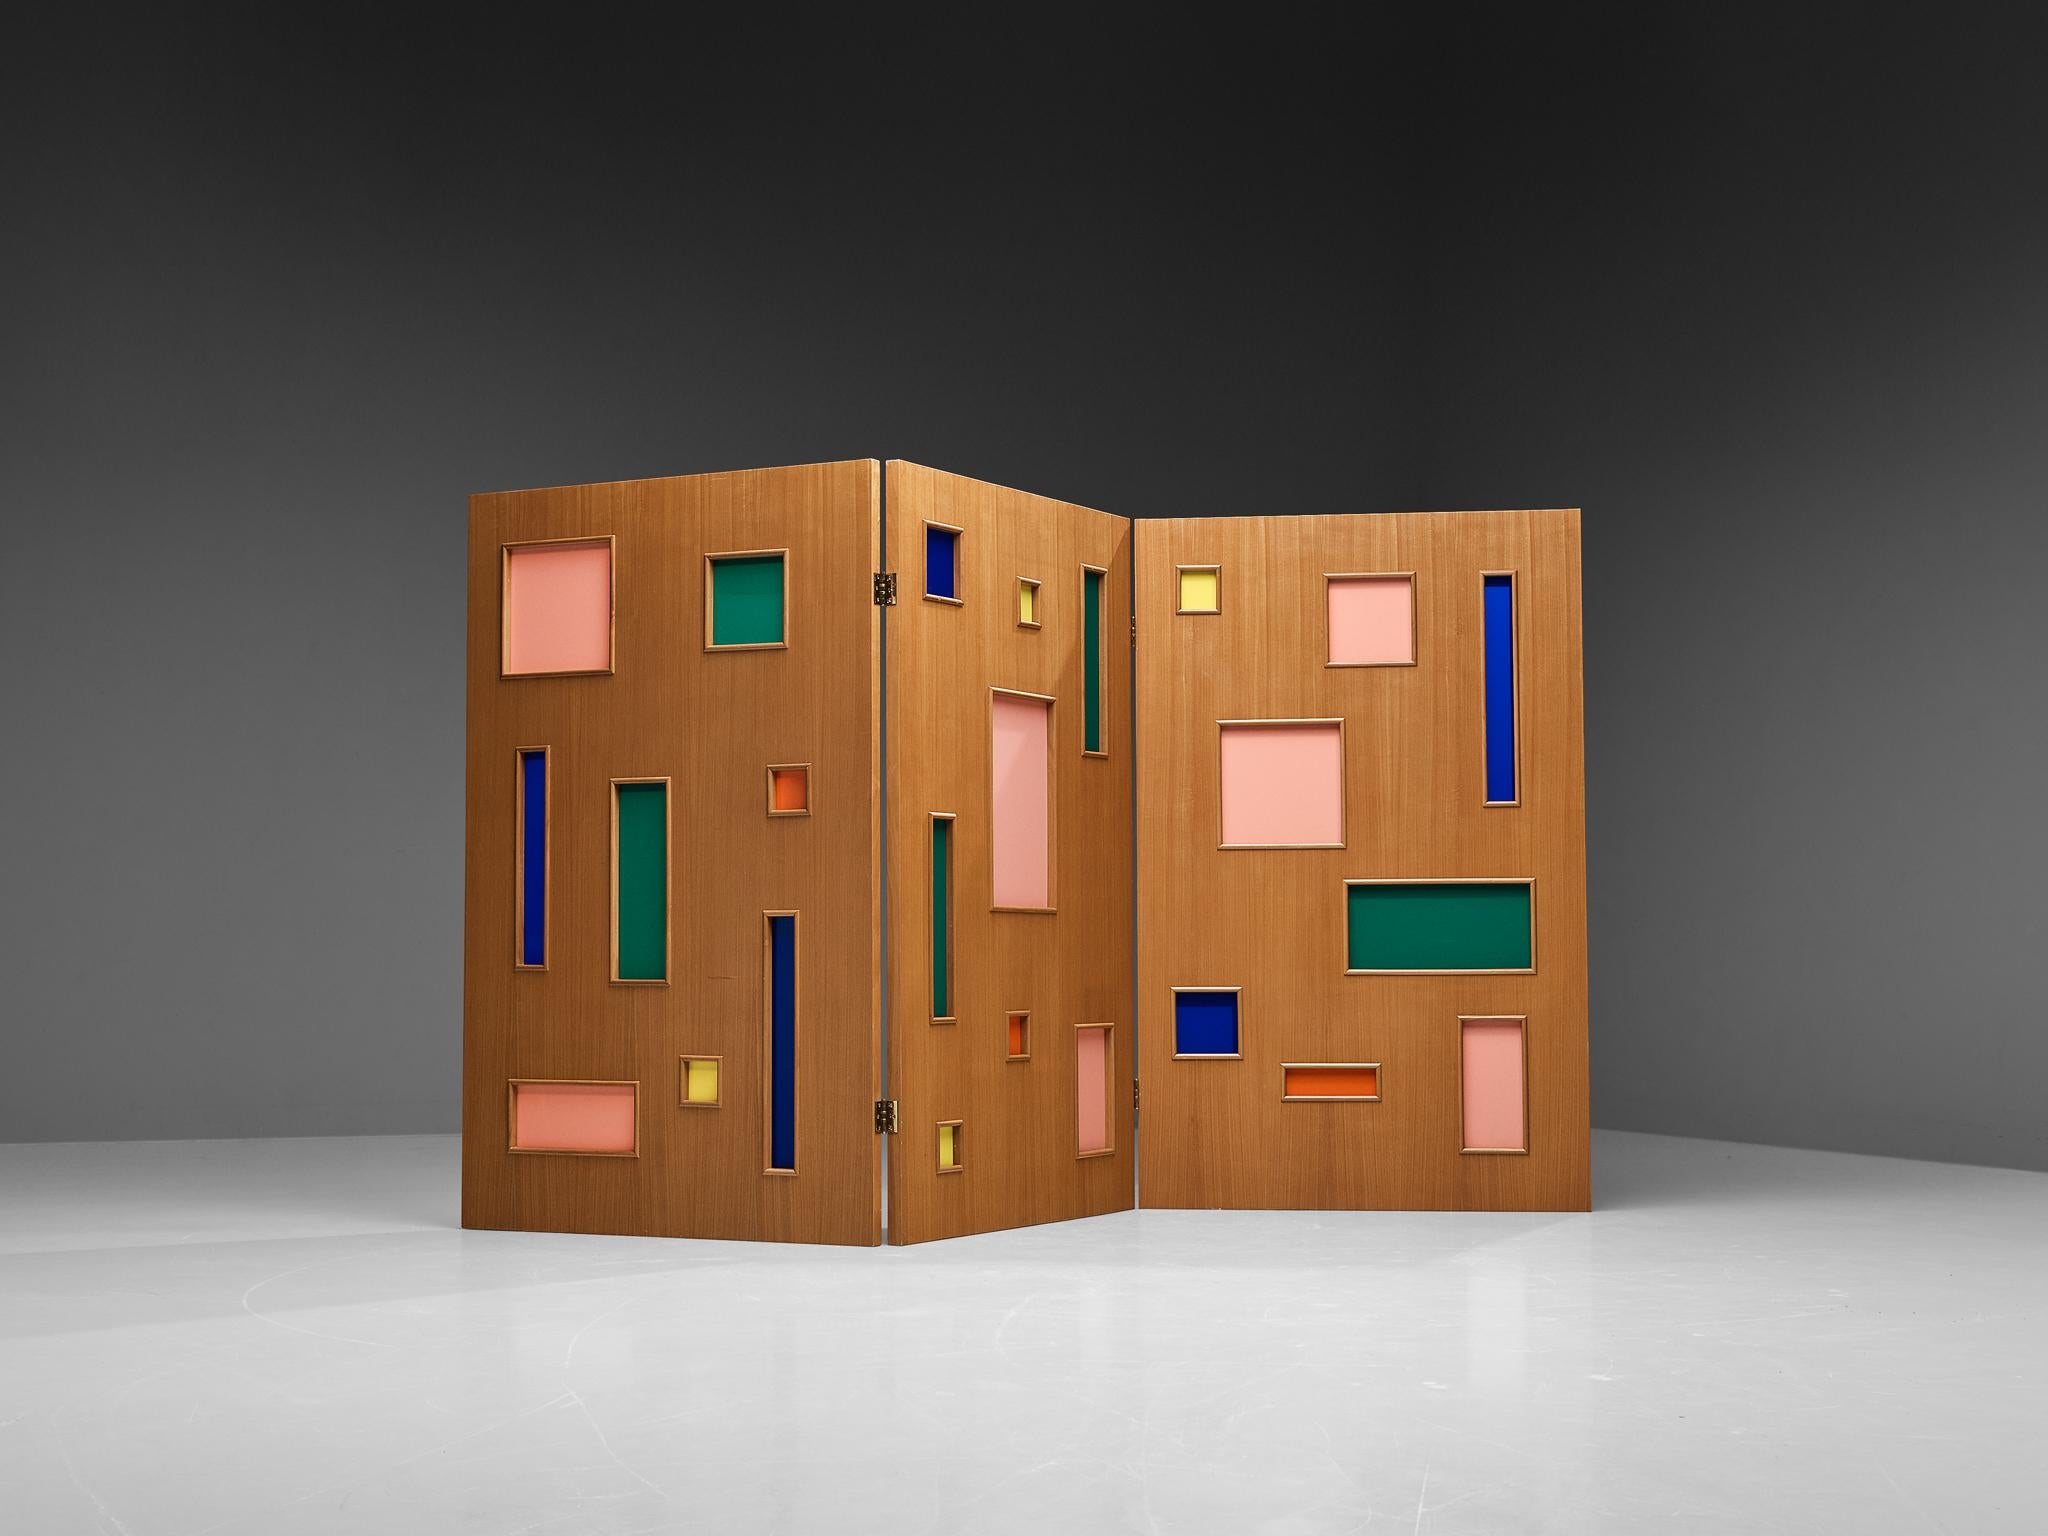 Room divider, plexiglass, beech, Italy, 1970s 

Elevate the vibrancy of your interior with this whimsical room divider crafted from wood and adorned with colored plexiglass panels in green, blue, red-orange, yellow, and salmon pink. This sturdy yet